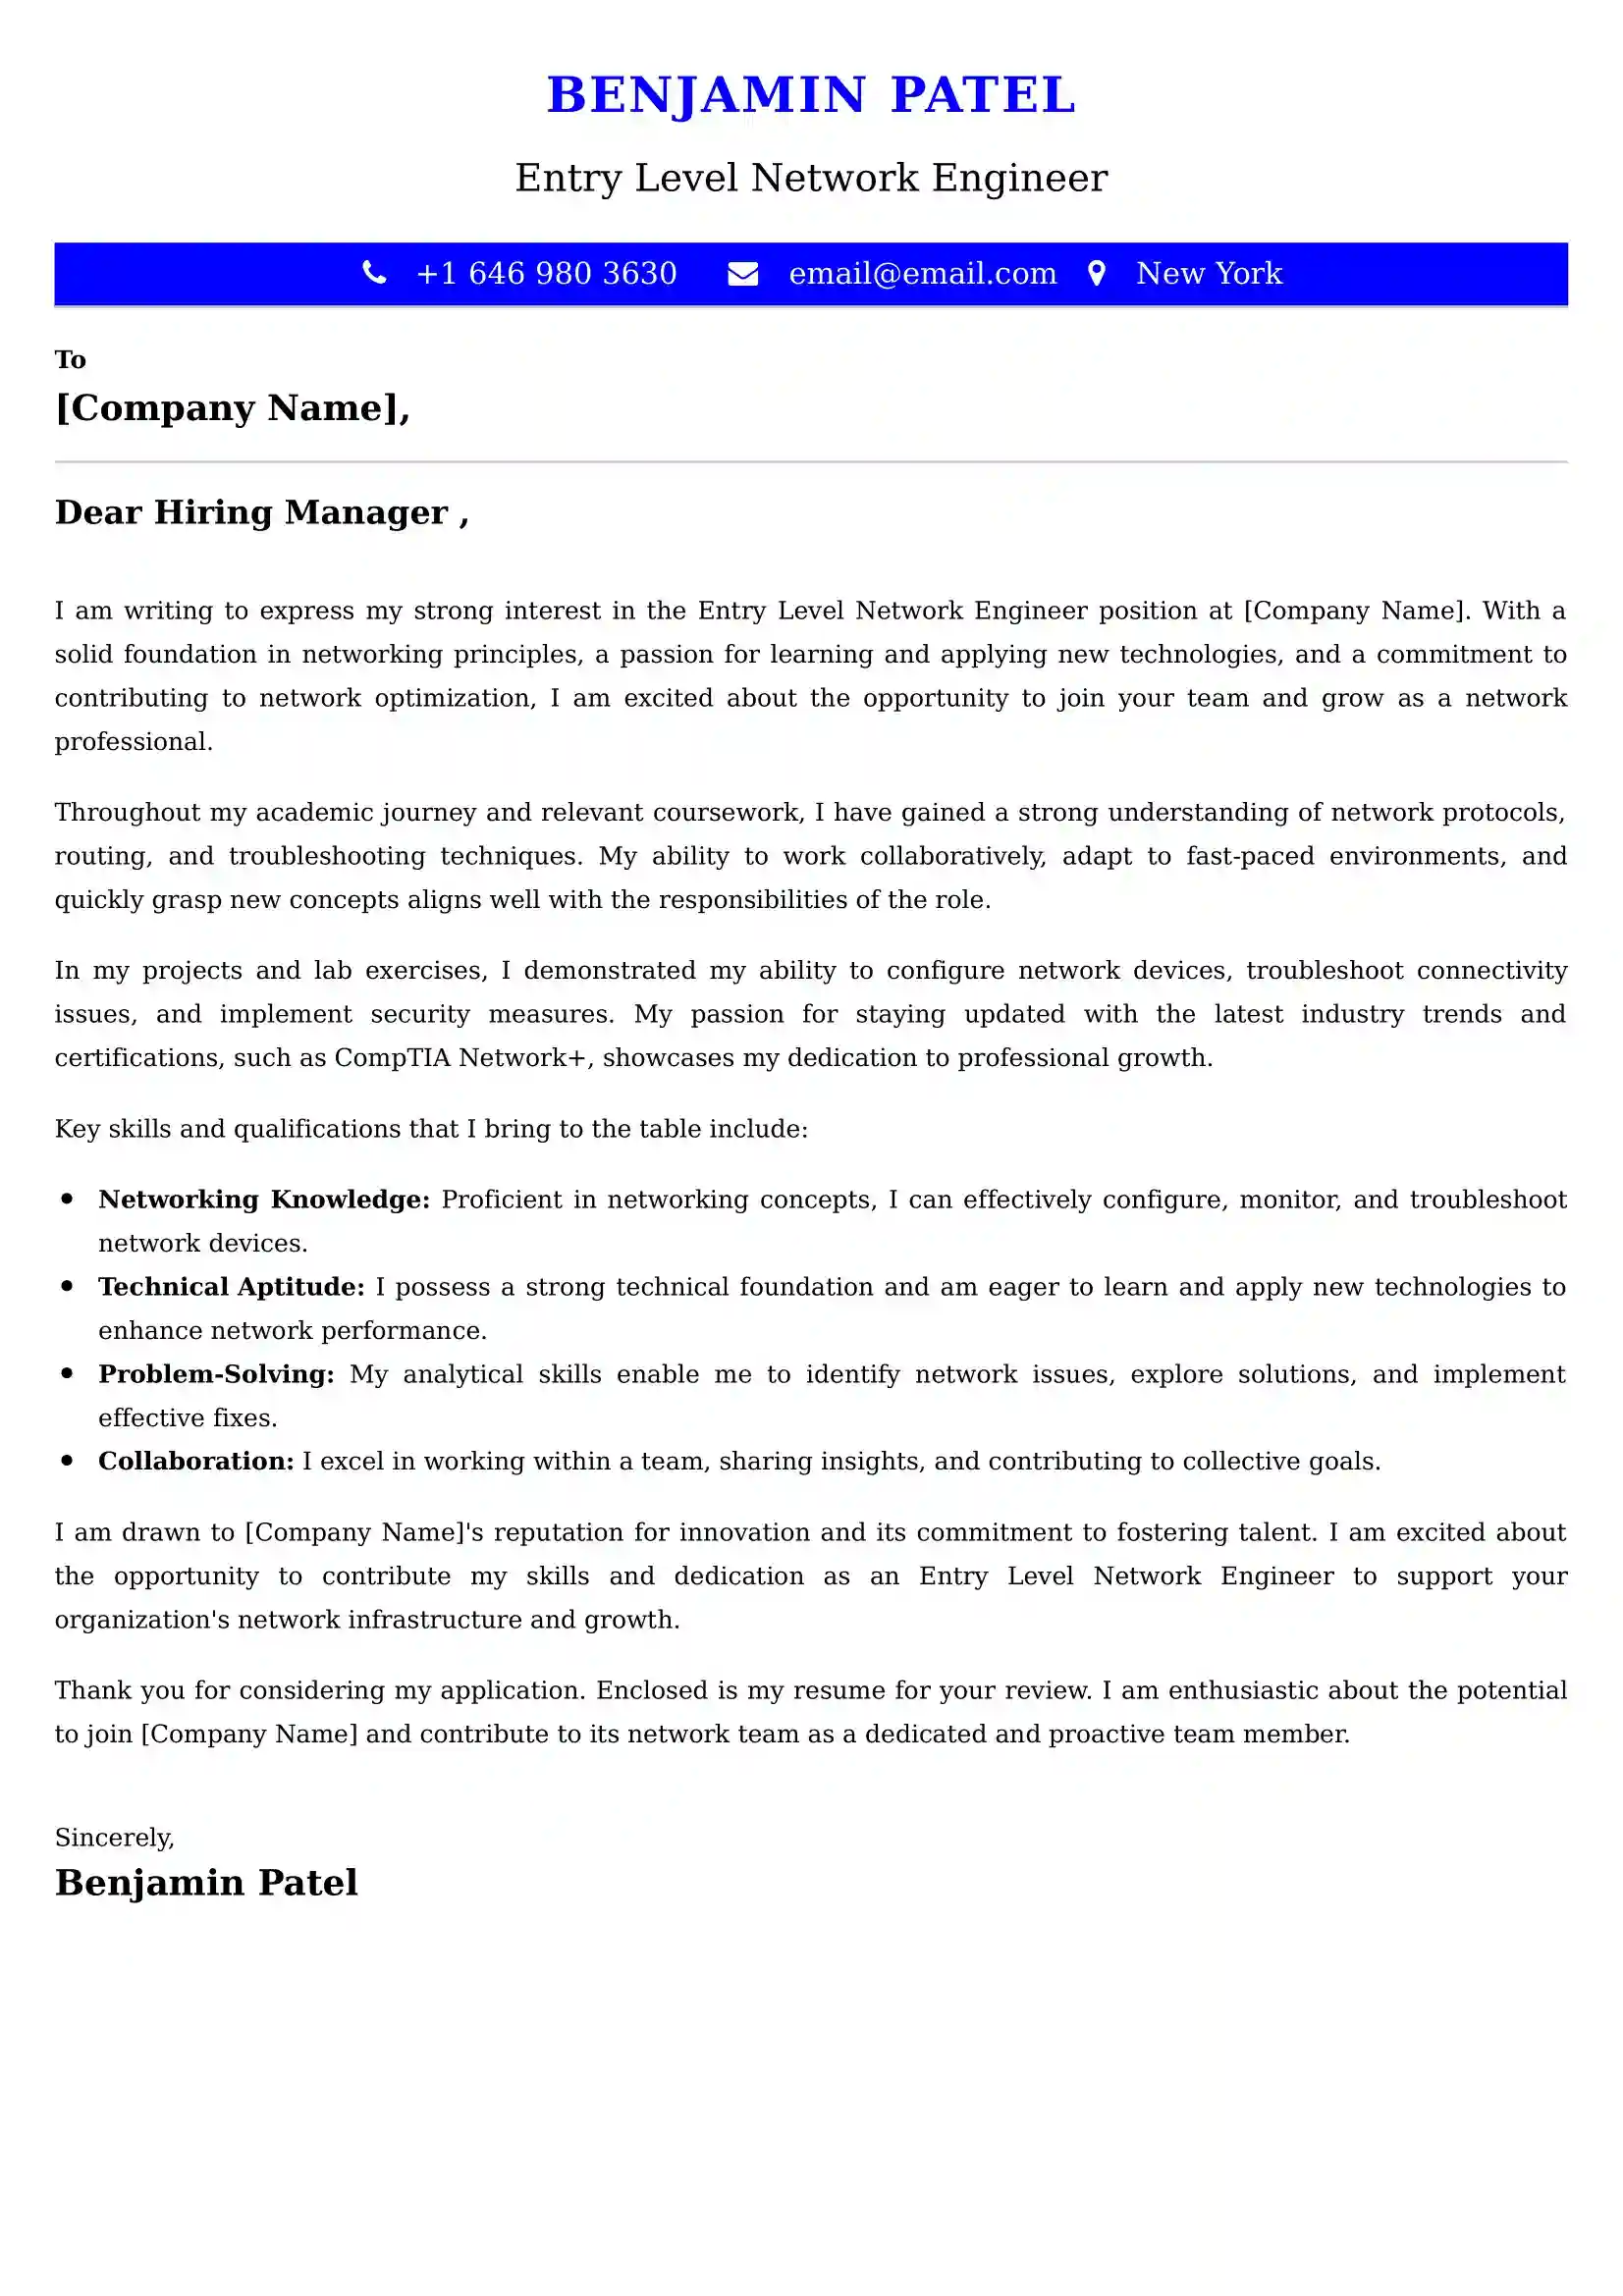 Entry Level Network Engineer Cover Letter Examples India